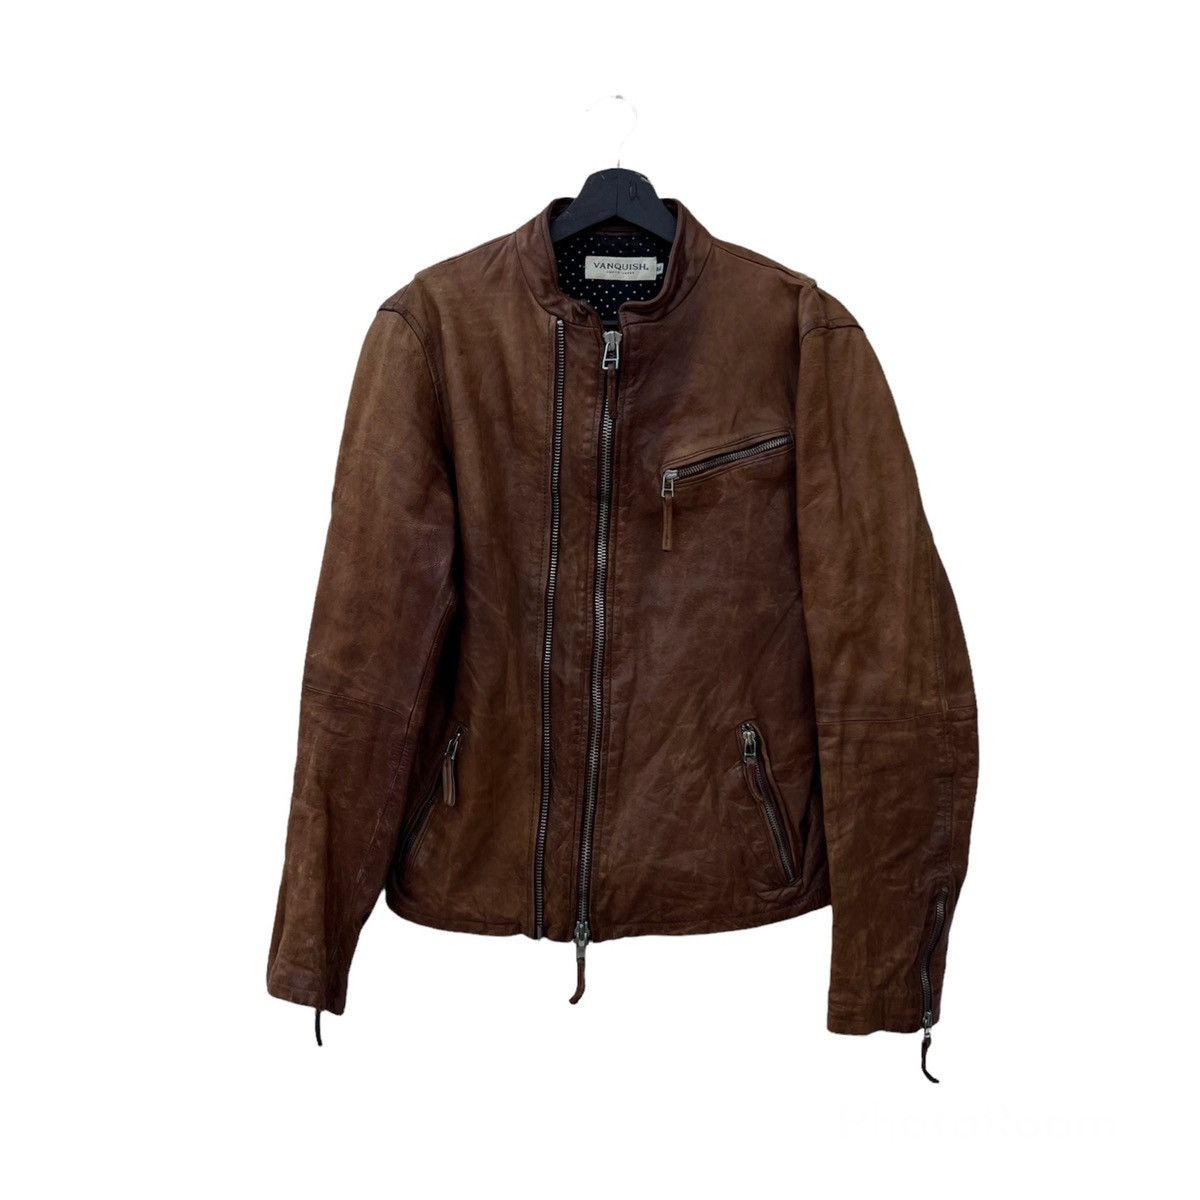 Men's Hysteric Glamour Leather Jackets | Grailed